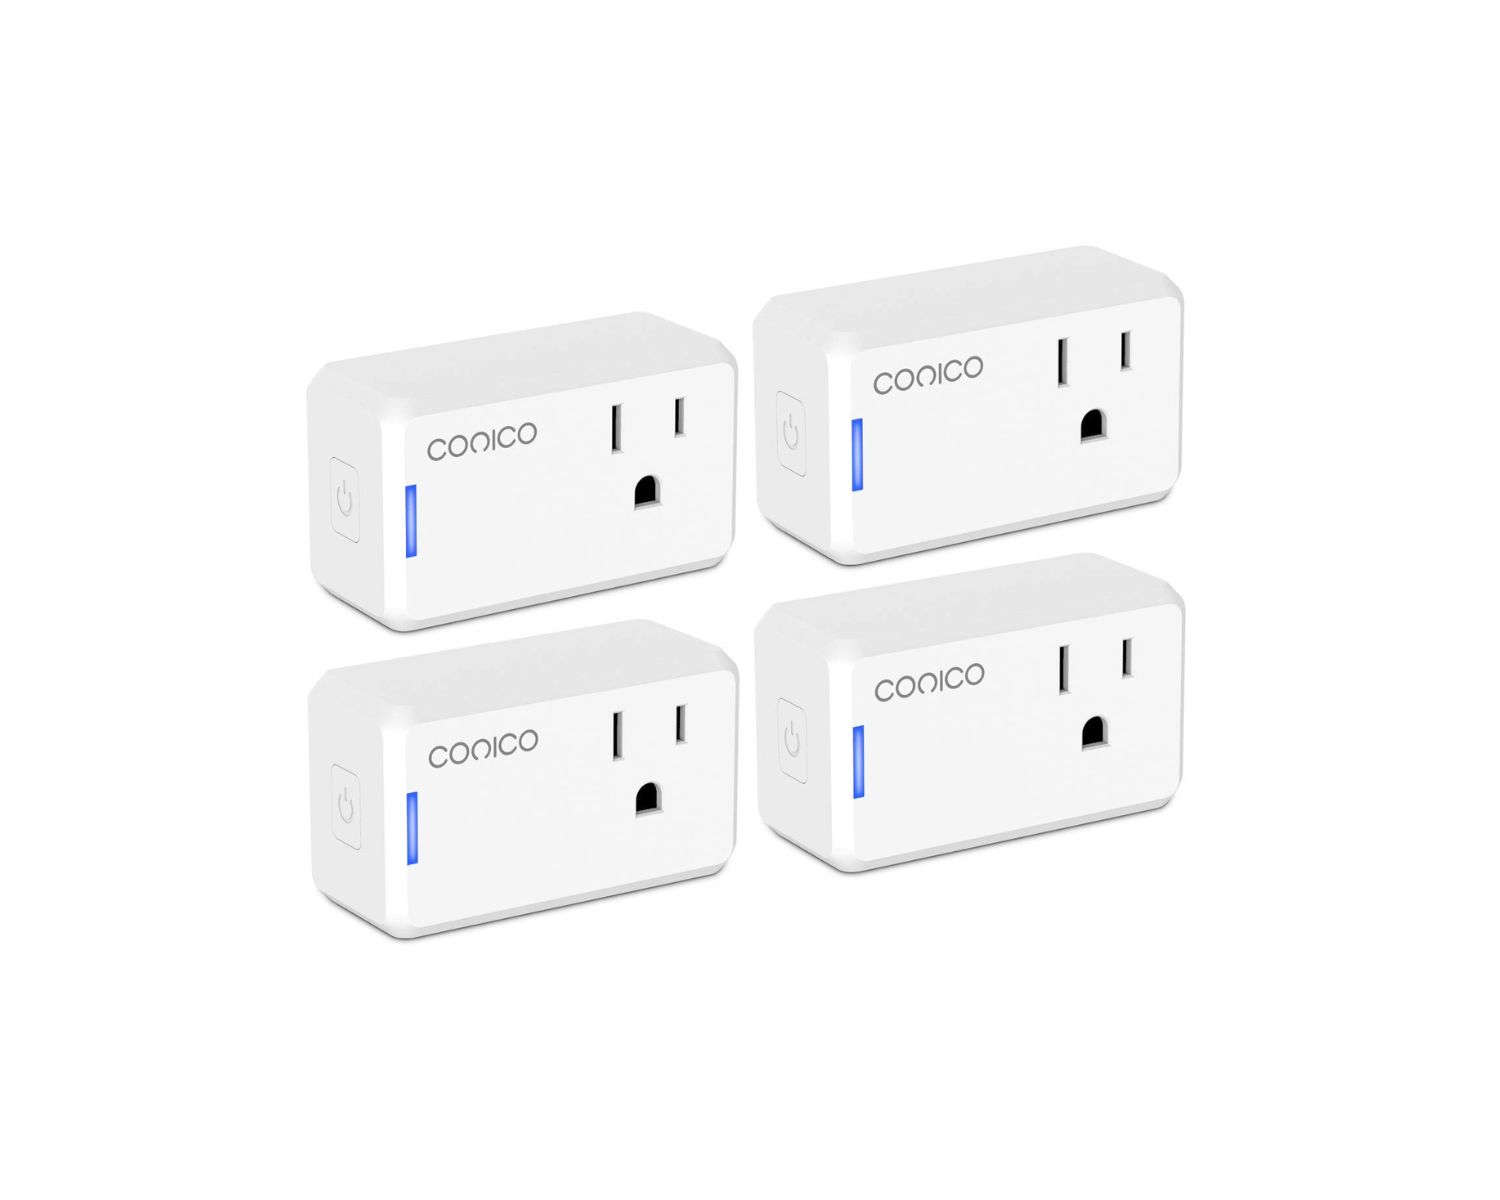 Eightree 5GHz Smart Plug with Energy Monitoring, Plugs that Work